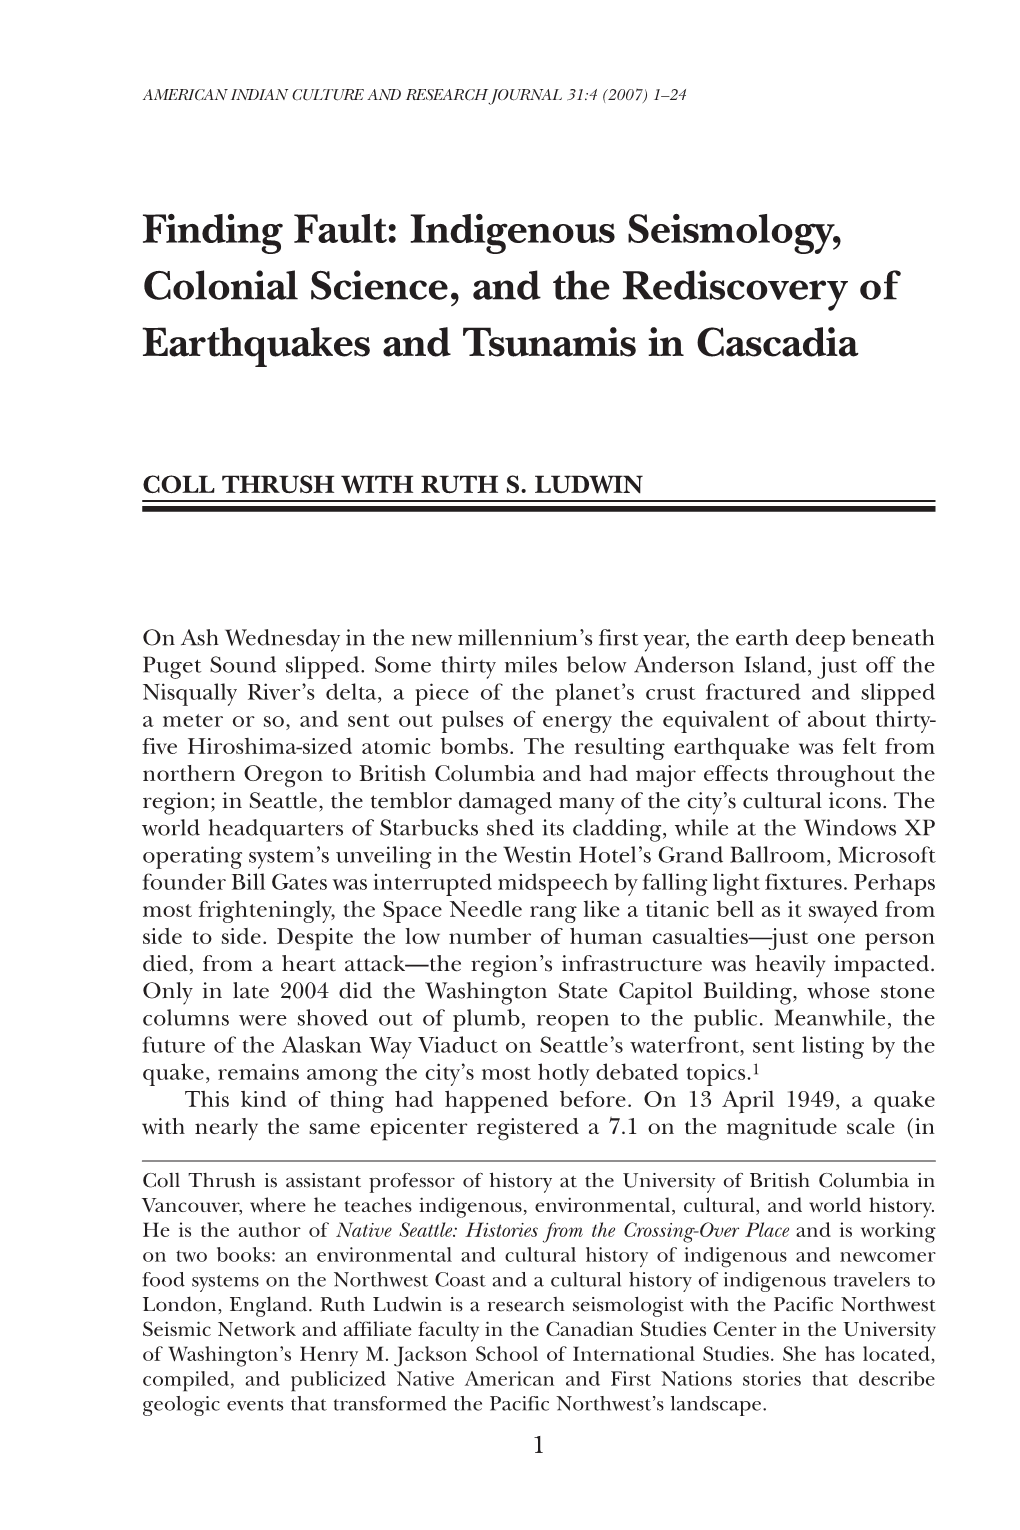 Finding Fault: Indigenous Seismology, Colonial Science, and the Rediscovery of Earthquakes and Tsunamis in Cascadia